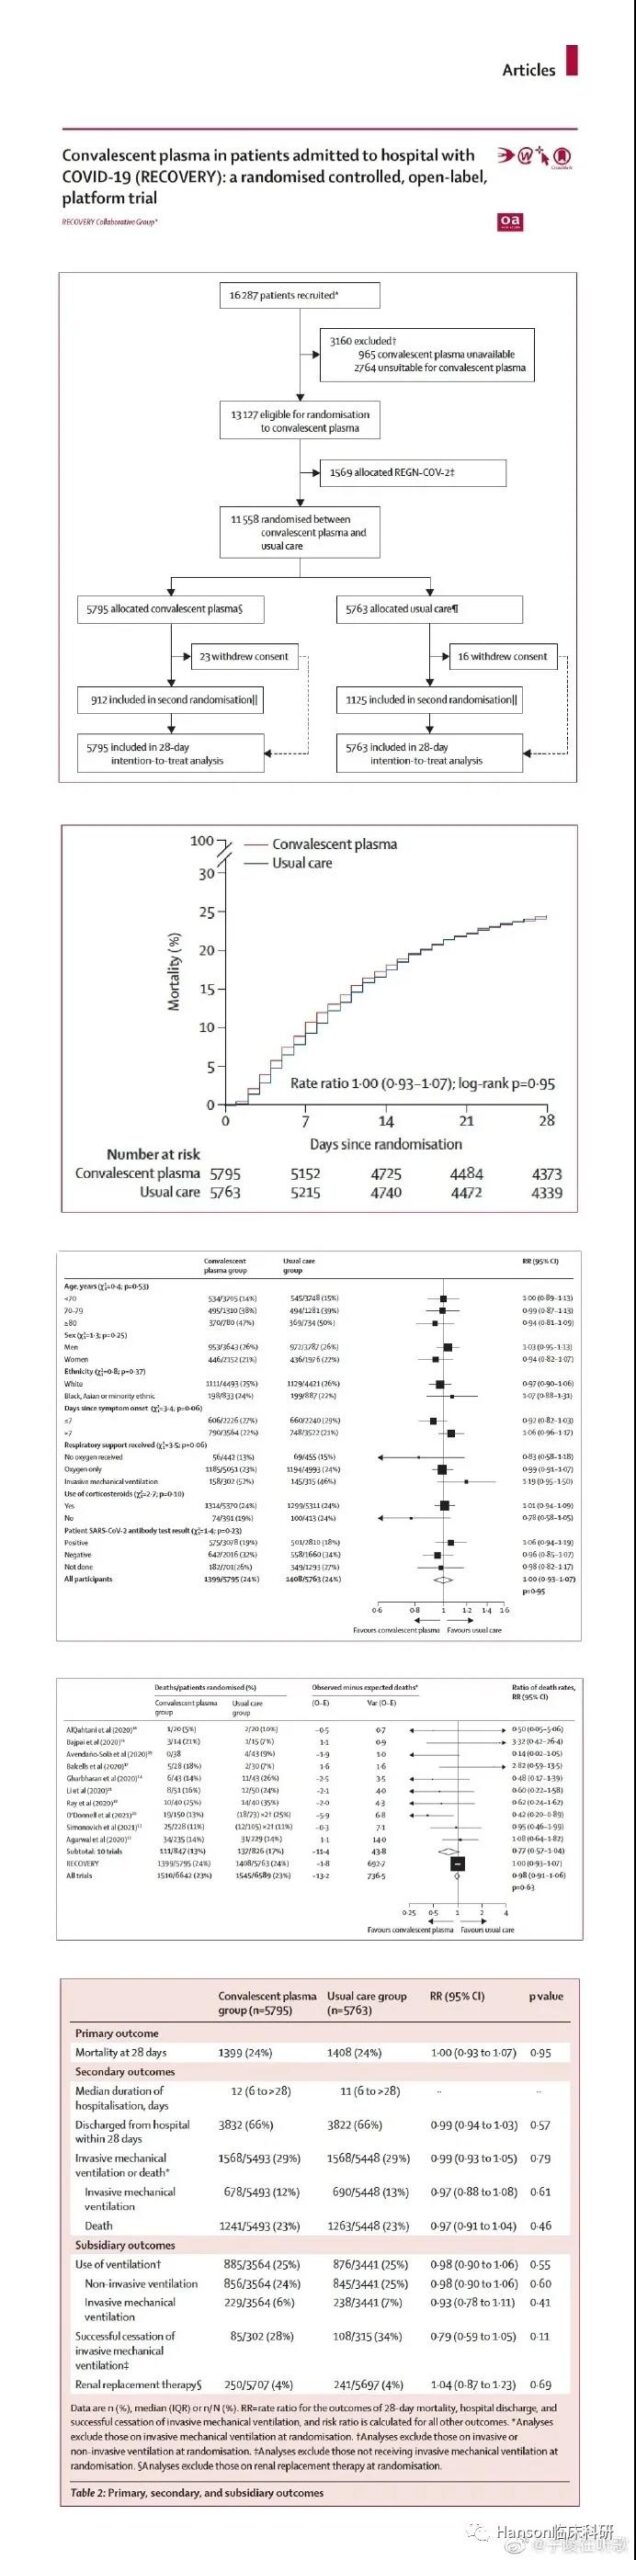 The plasma of recovered patients cannot improve COVID-19 survival rate